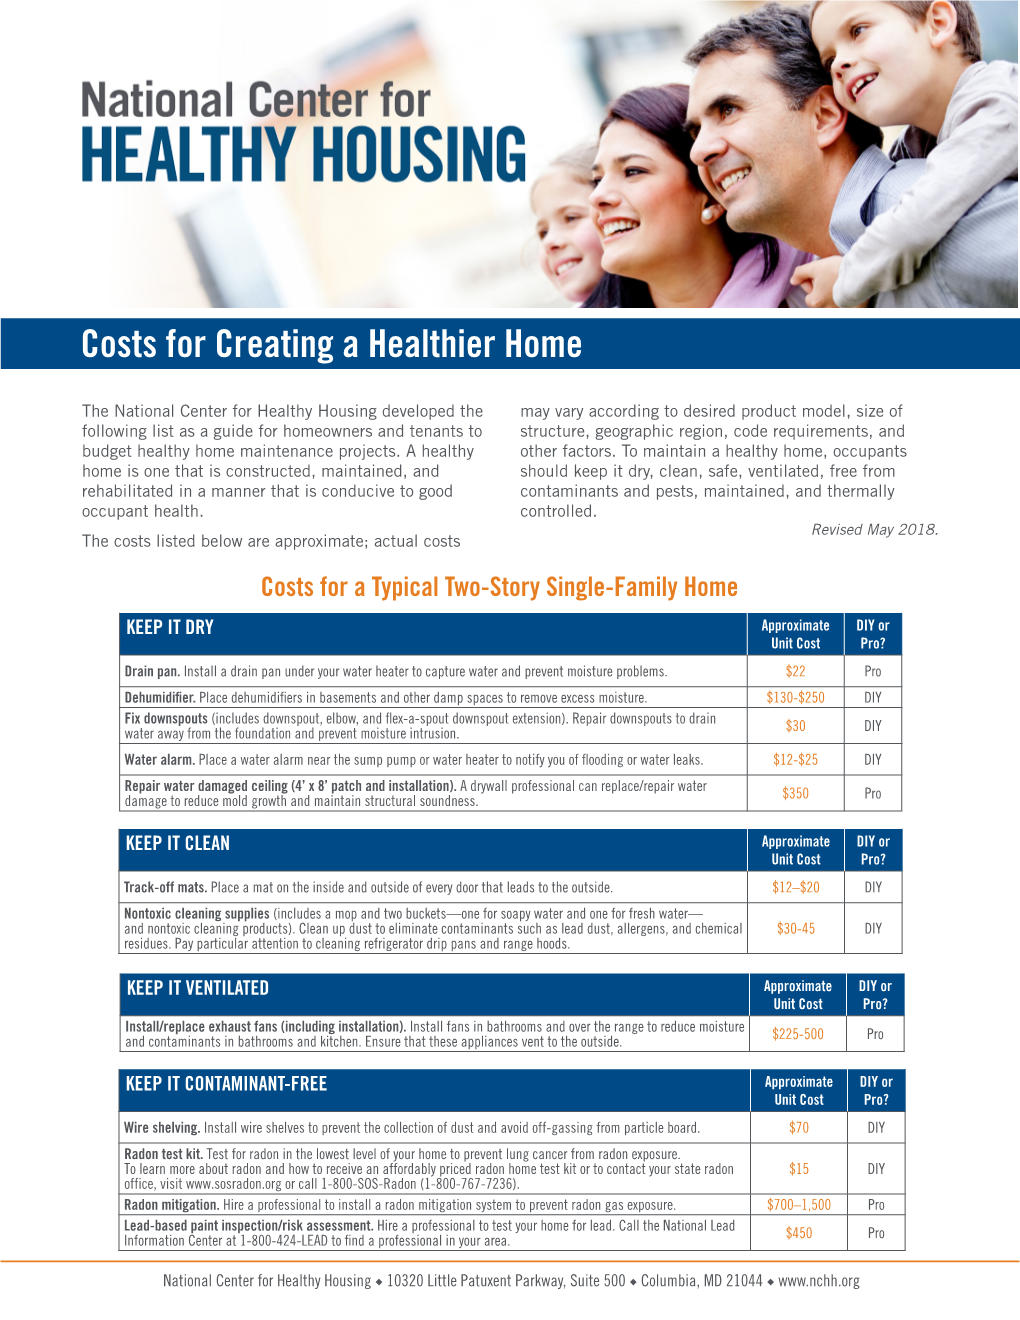 Costs for Creating a Healthier Home